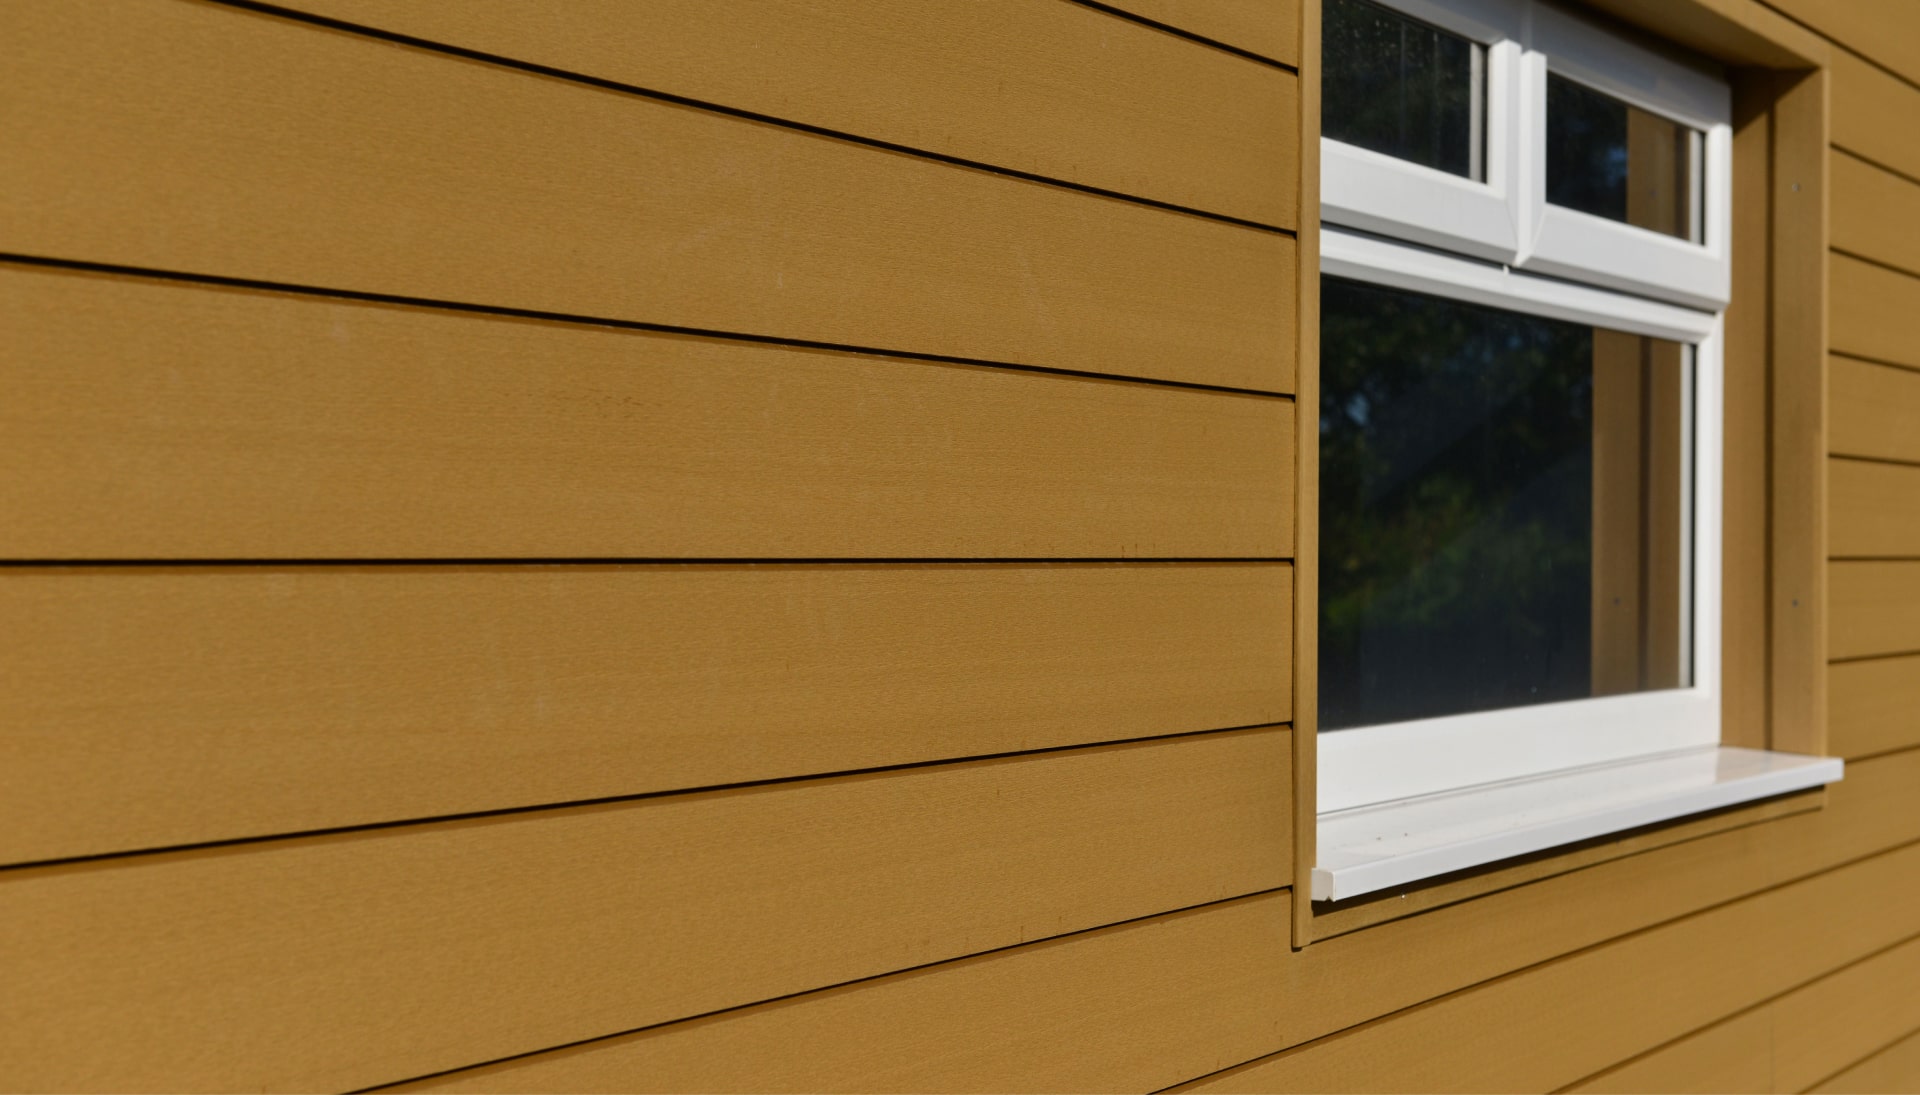 Advanced composite siding in a mustard brown color being installed in an older home.